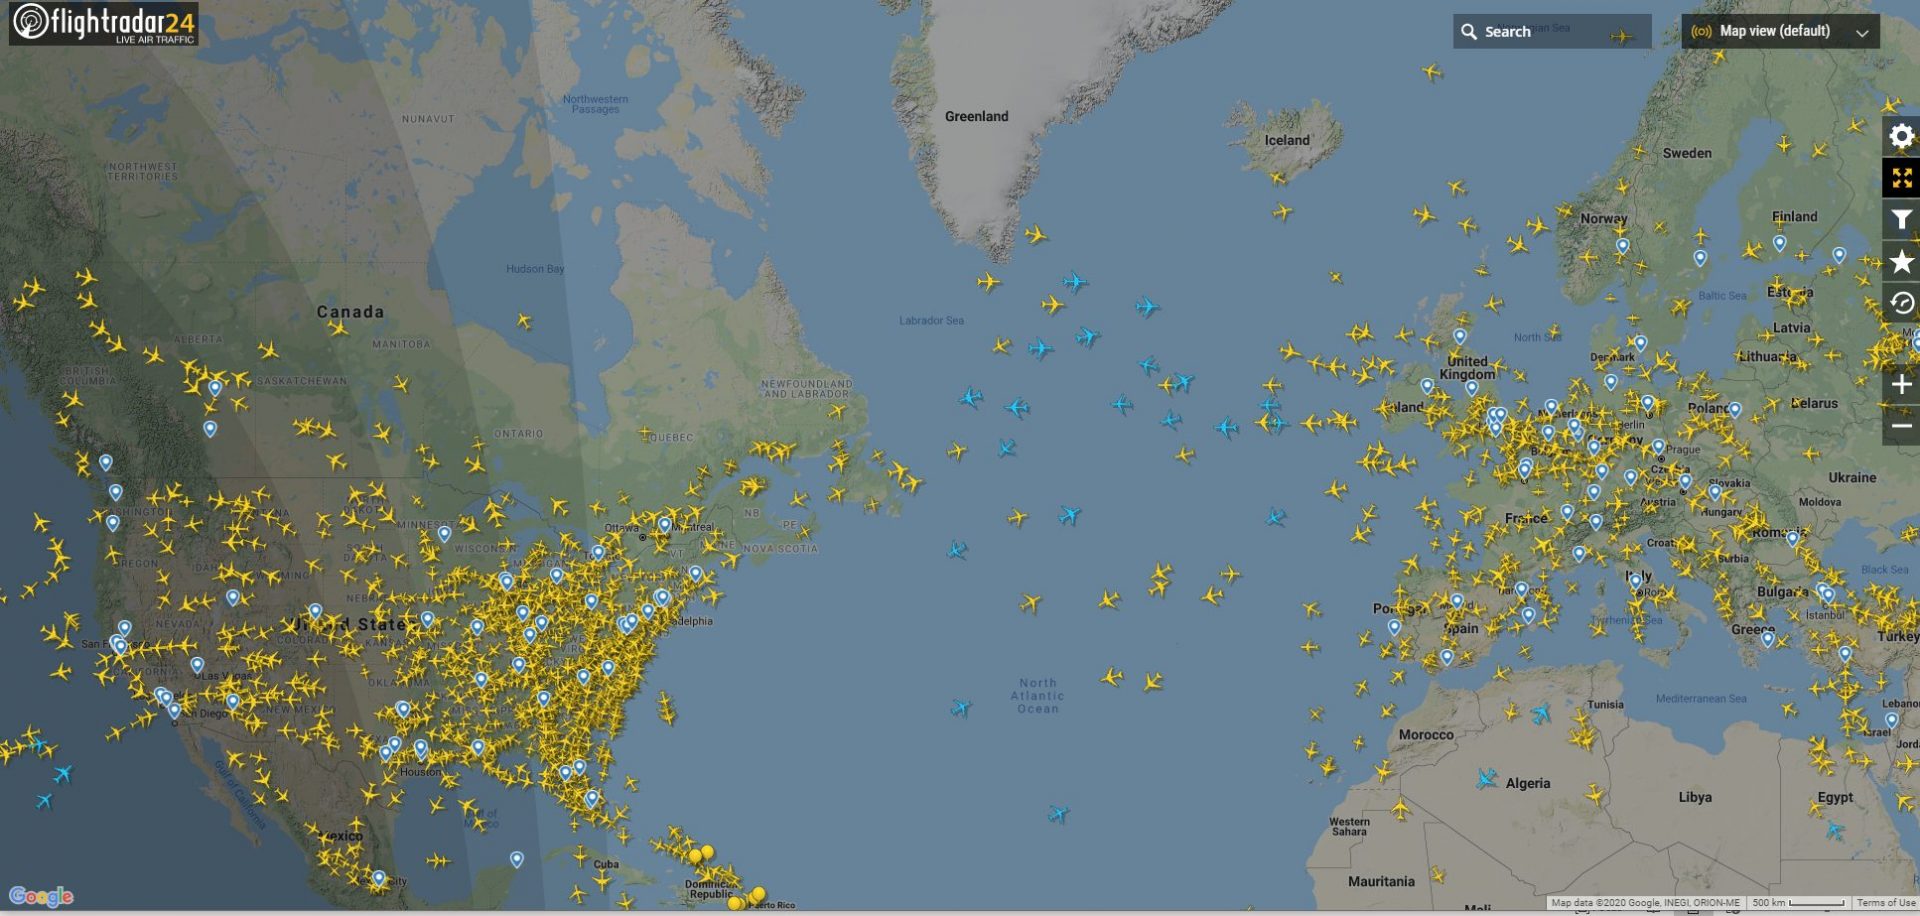 Counterpoint Covid update: Reduced air traffic over the Atlantic